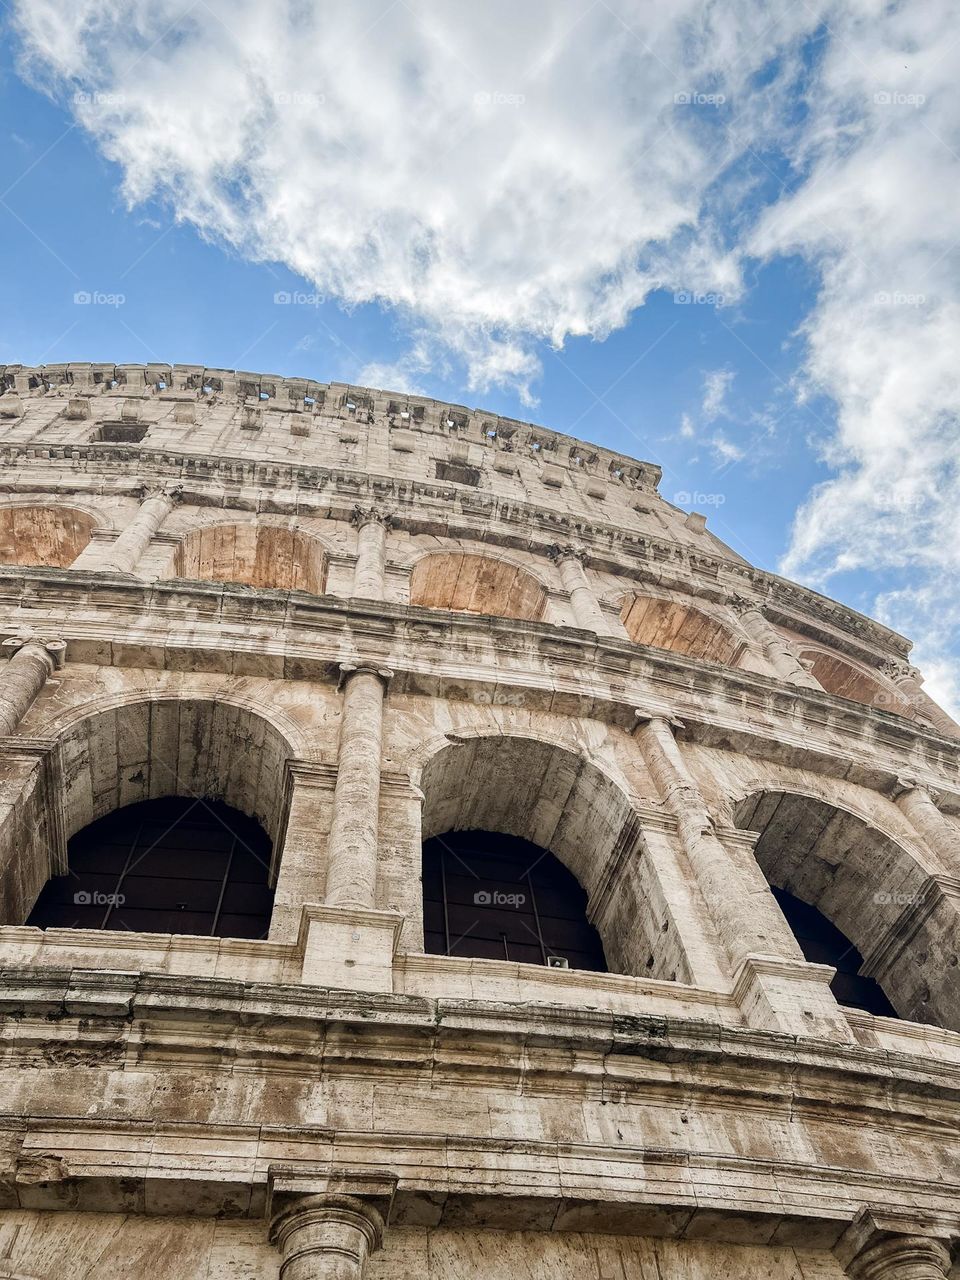 Looking up at the colosseum